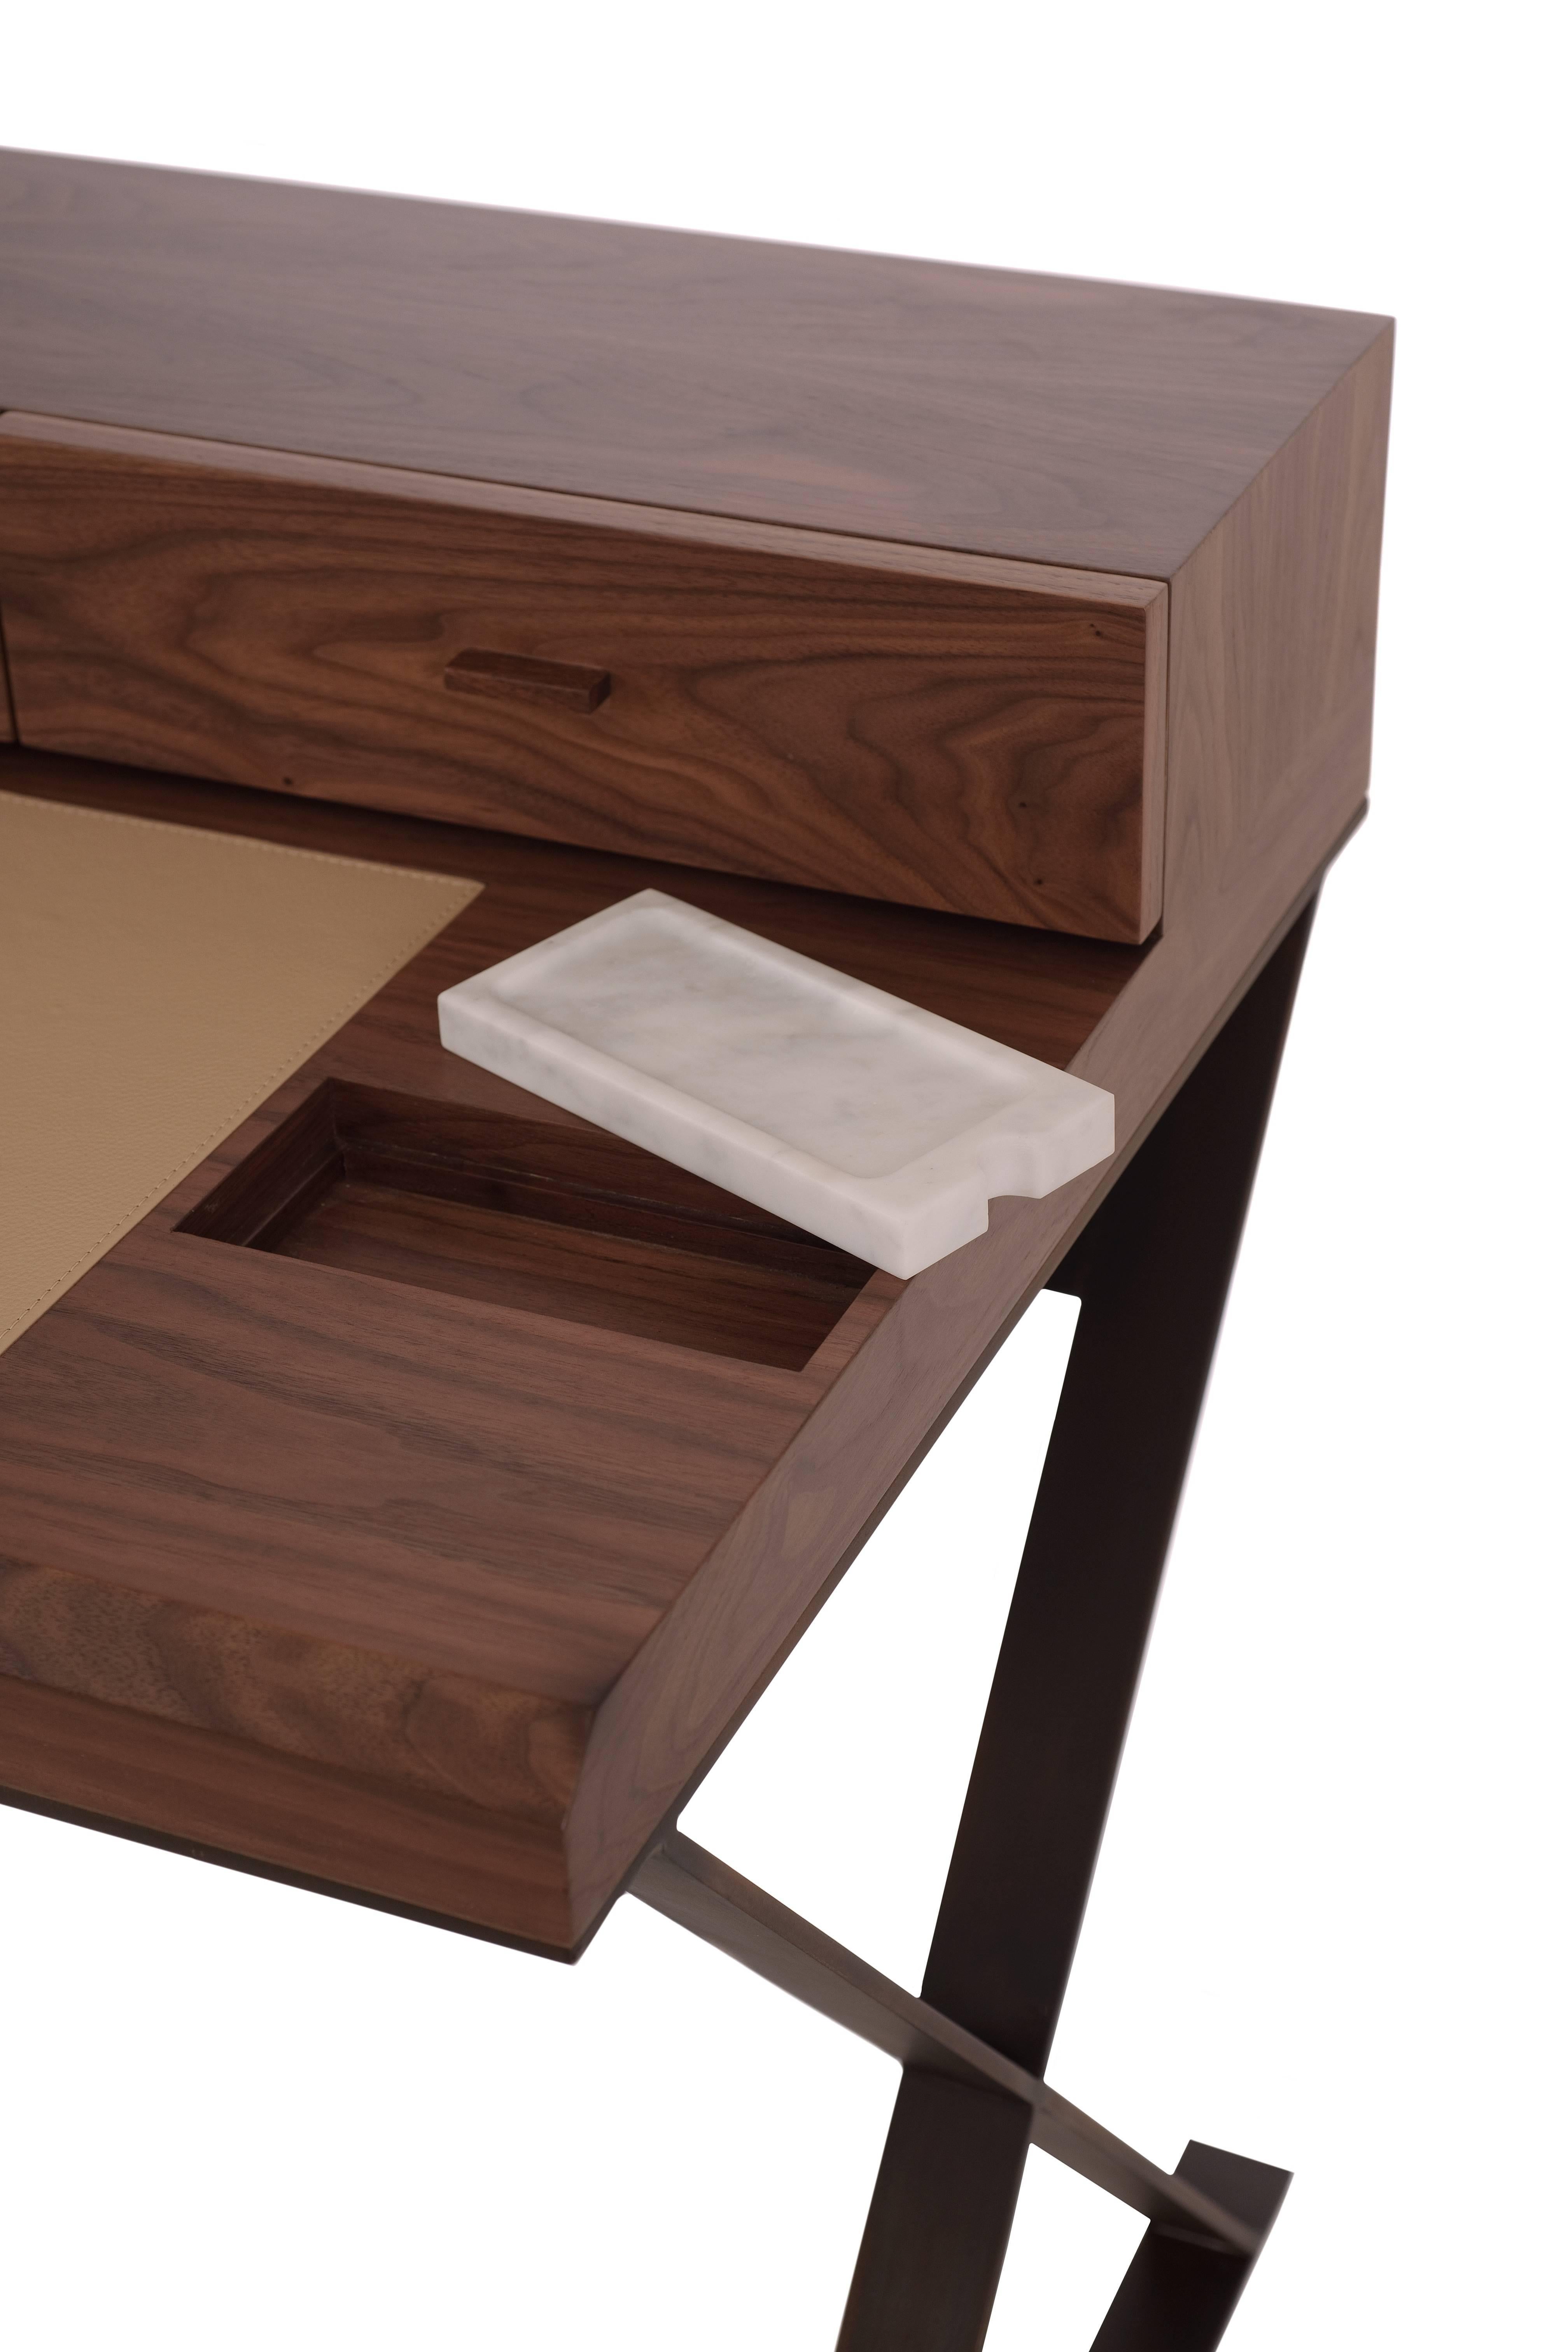 Italian Hemingway Walnut, Leather and Marble Desk For Sale 3